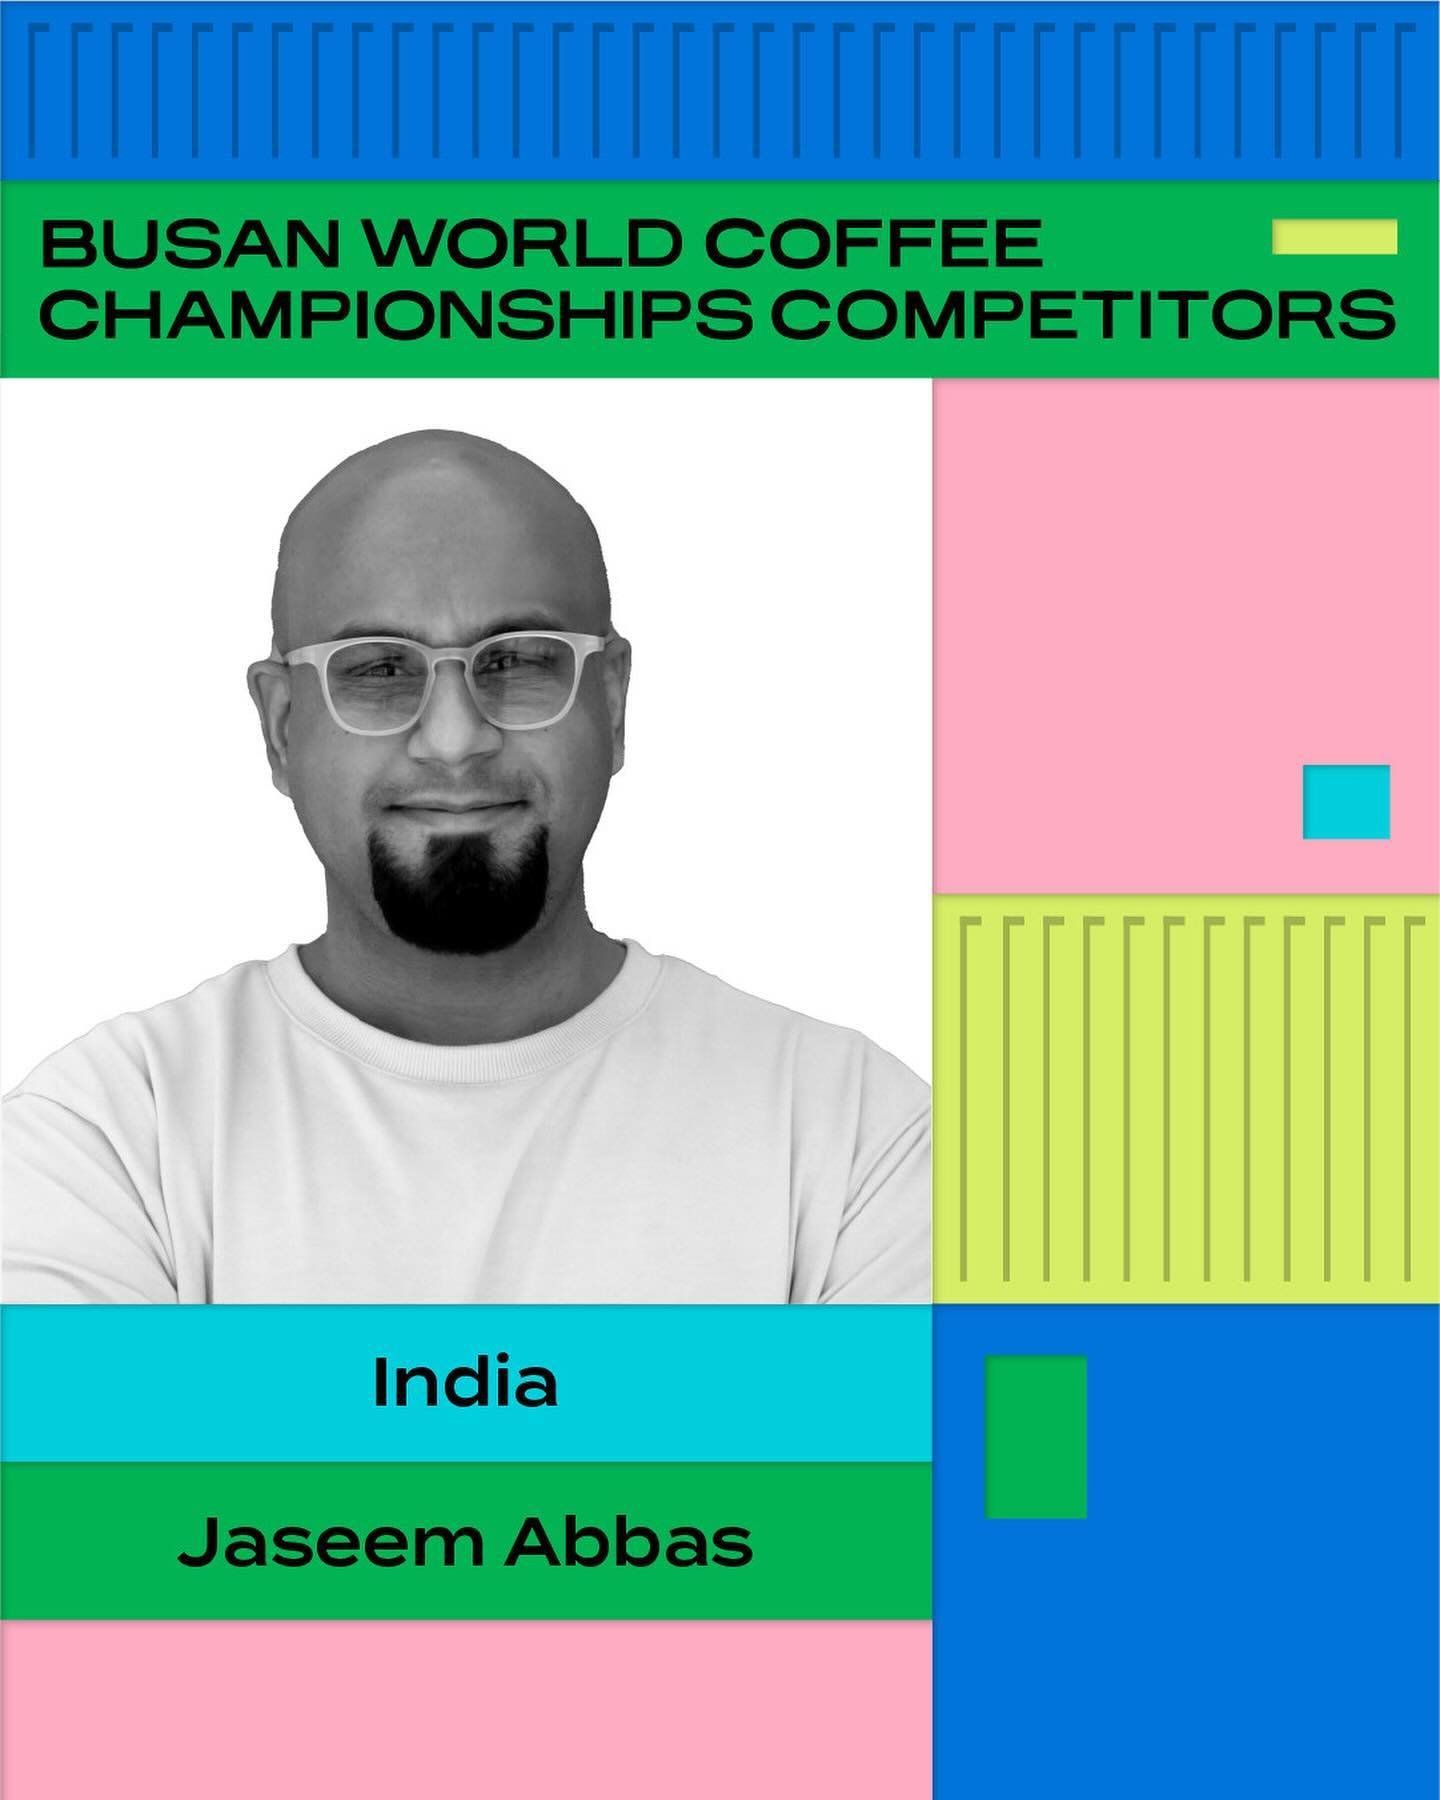 The World Barista Championship is about to kick off at World of Coffee Busan next week, with top-tier baristas from across the globe preforming on the world stage!⁣
⁣
Let's shine a light on the incredible talents representing the following Competitio